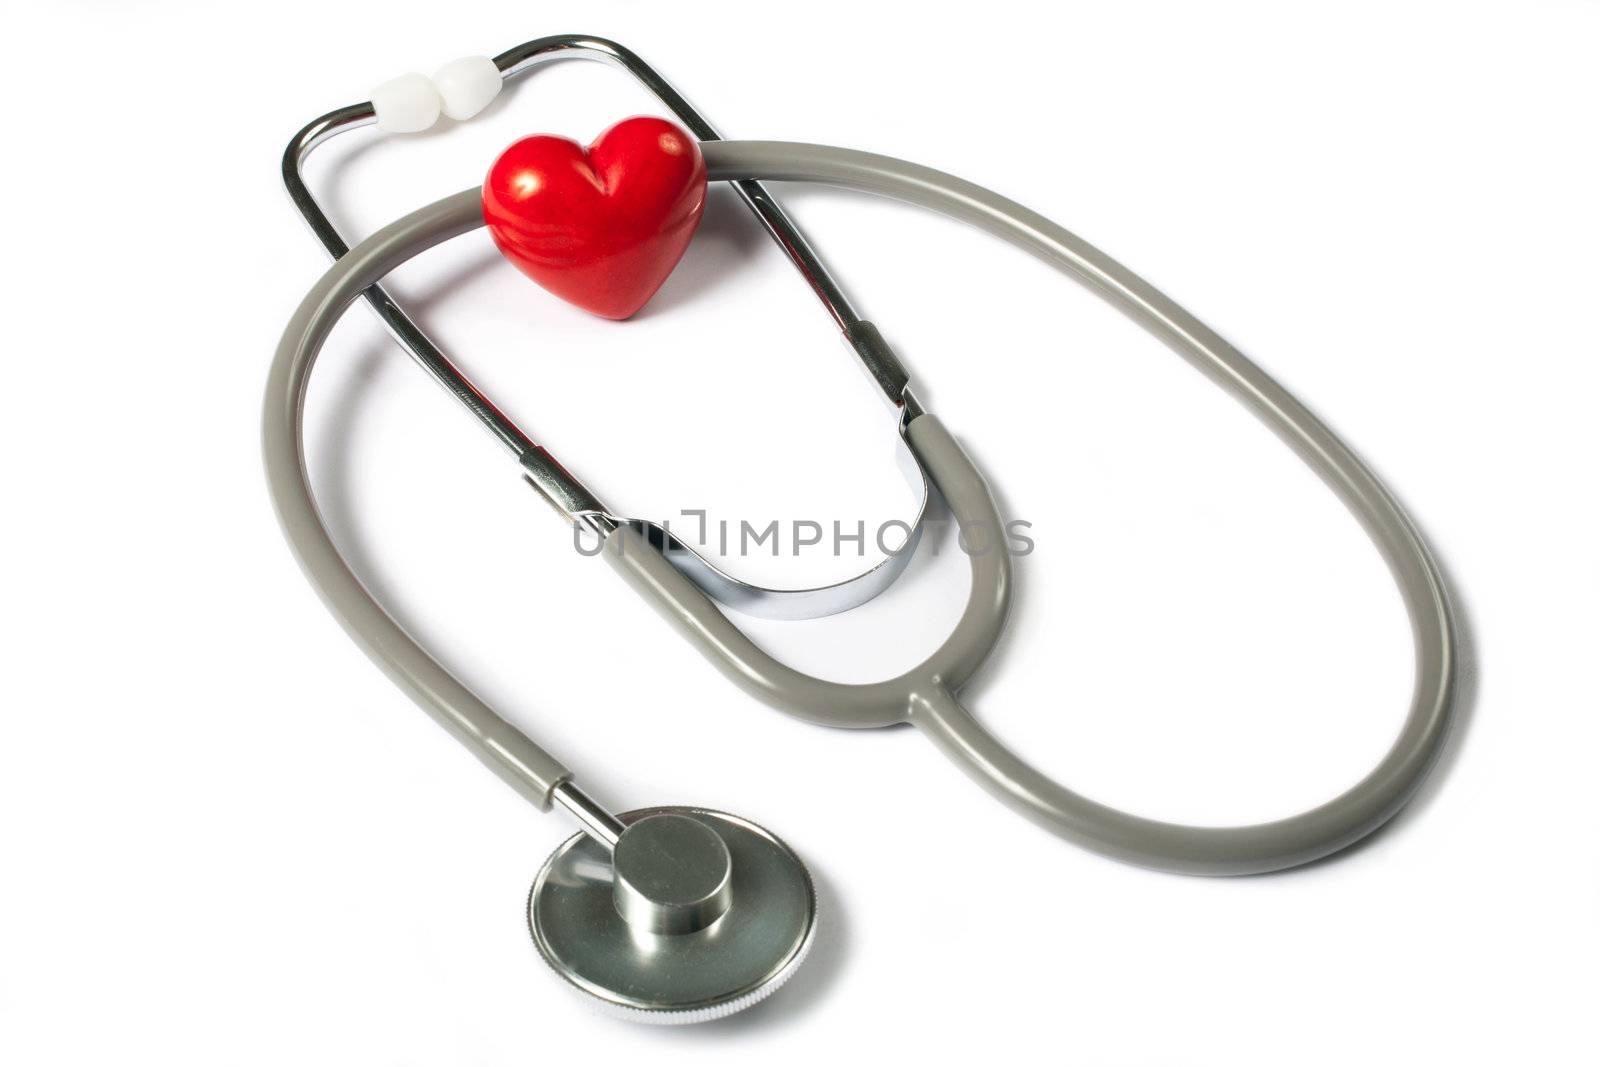 Stethoscope & red heart on white background